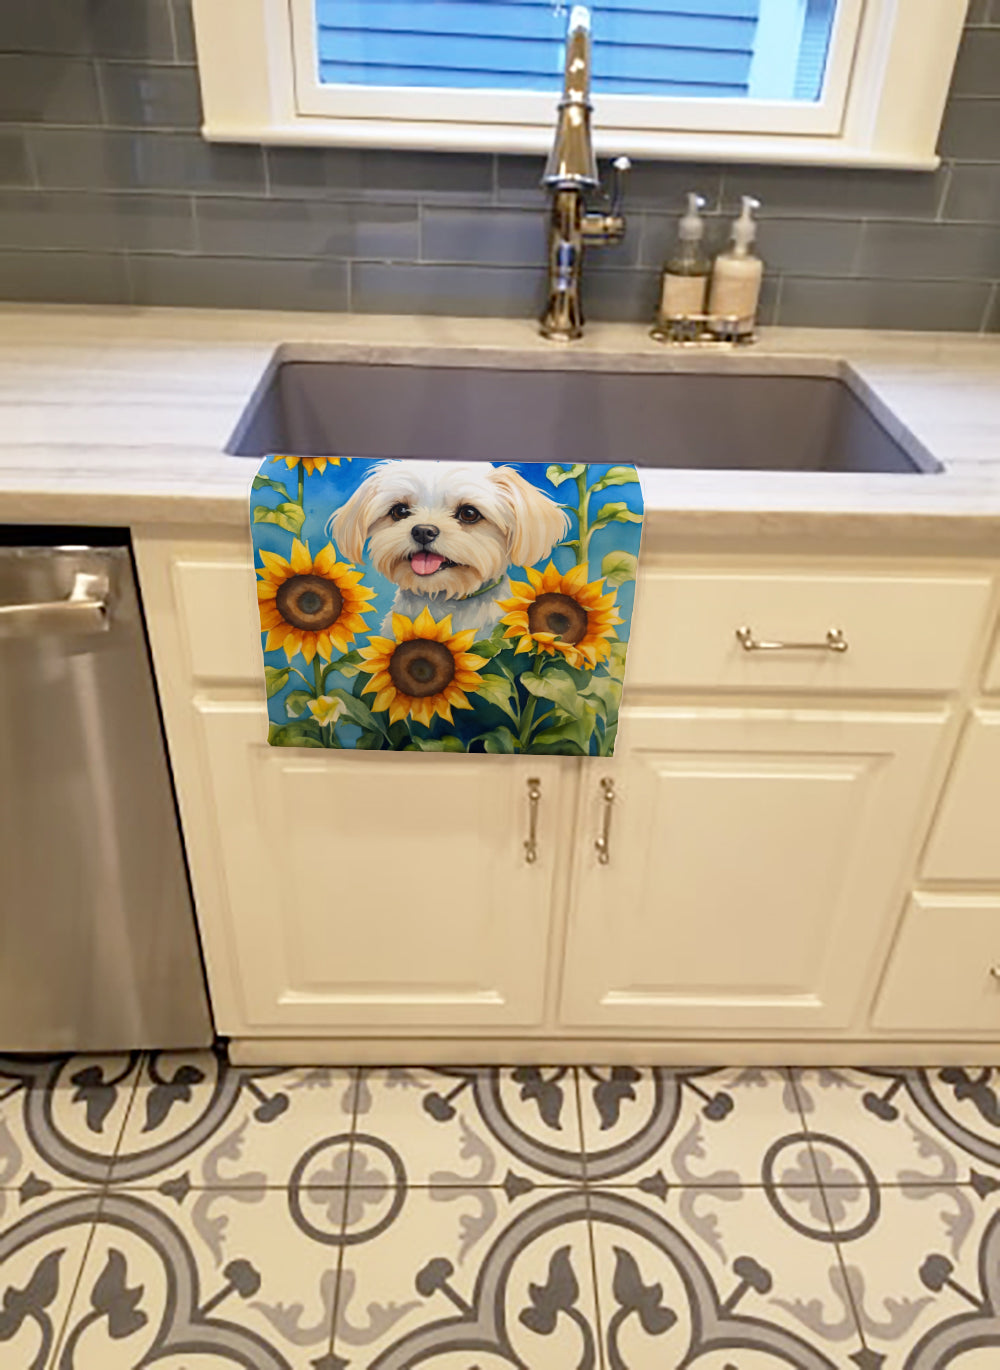 Buy this Maltese in Sunflowers Kitchen Towel